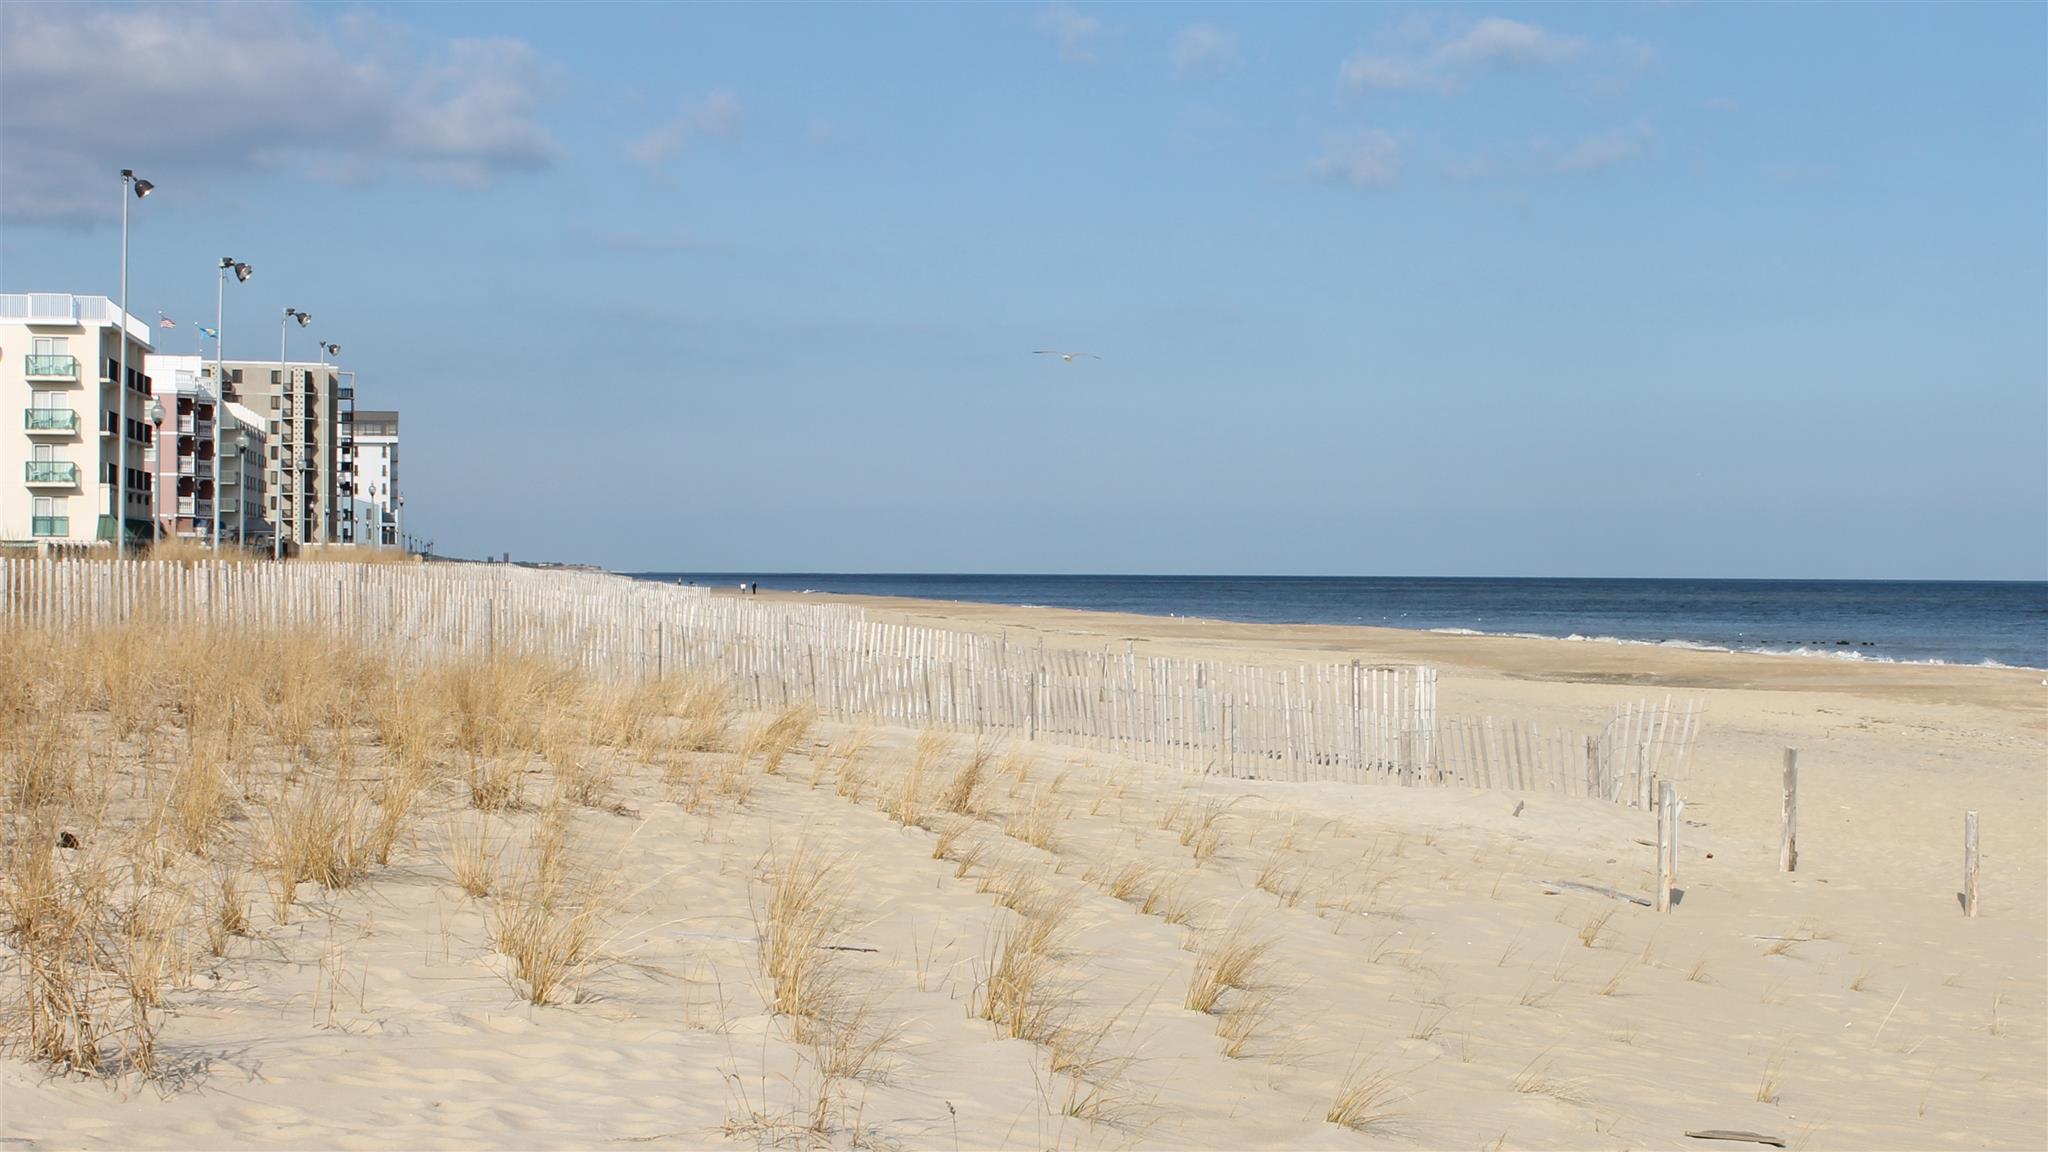 Rehoboth Beach, DE Treatment Centers. Find drug rehab in Rehoboth Beach, Delaware, or detox and treatment programs. Get the right help now!